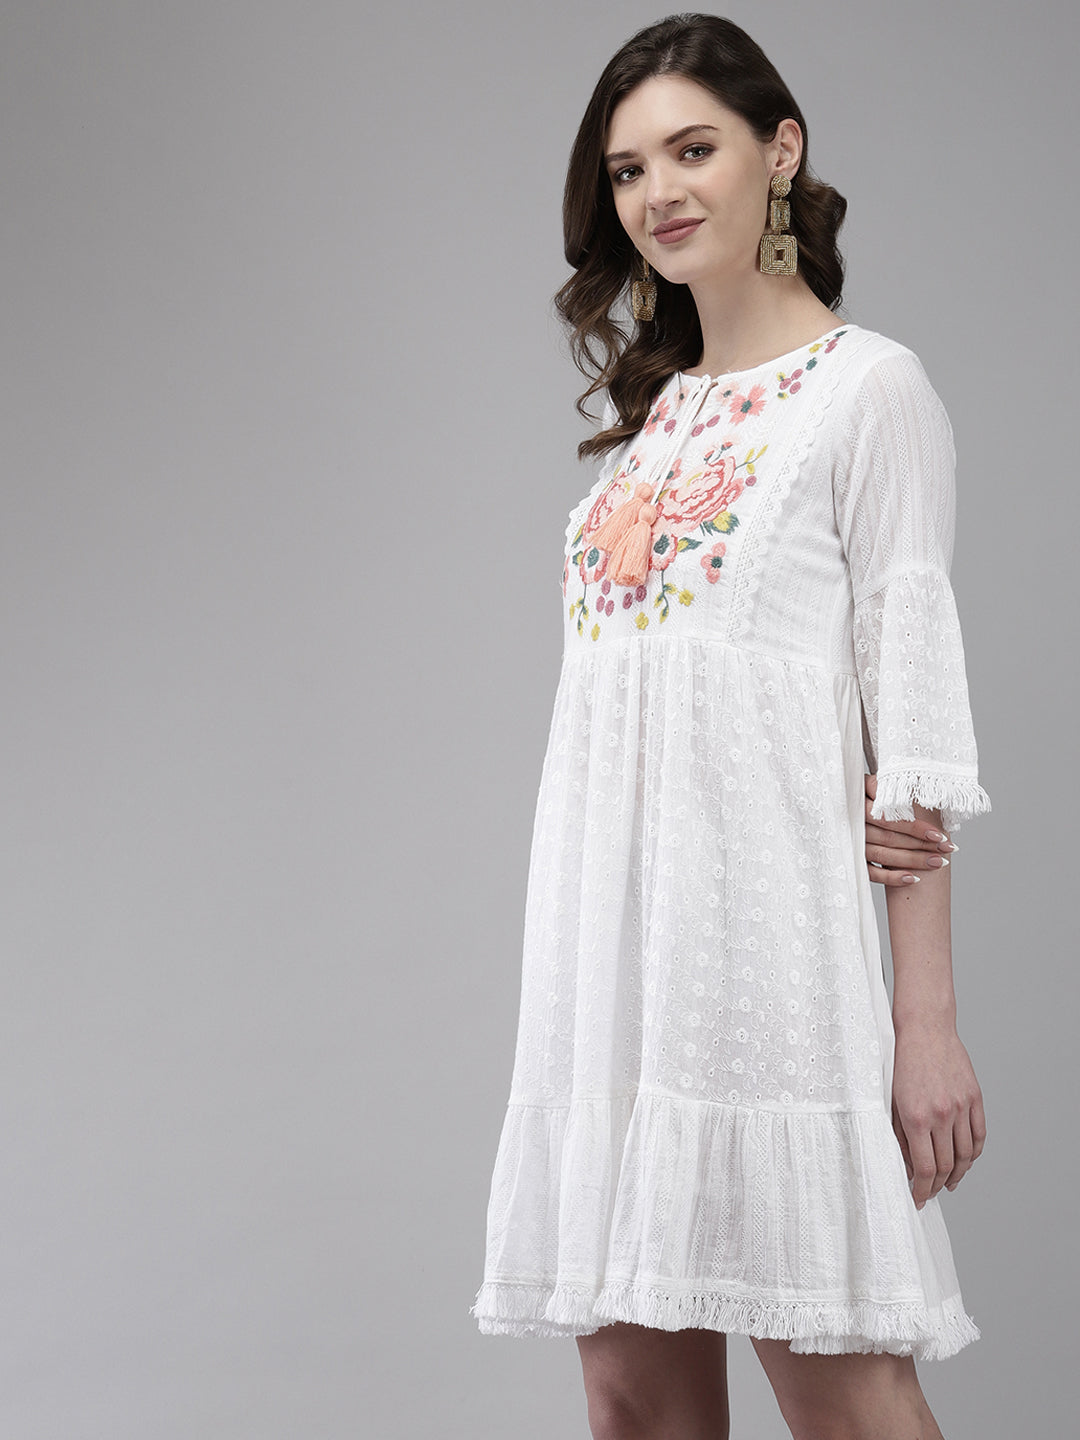 Ishin Women's Cotton Blend White Embroidered A-Line Dress